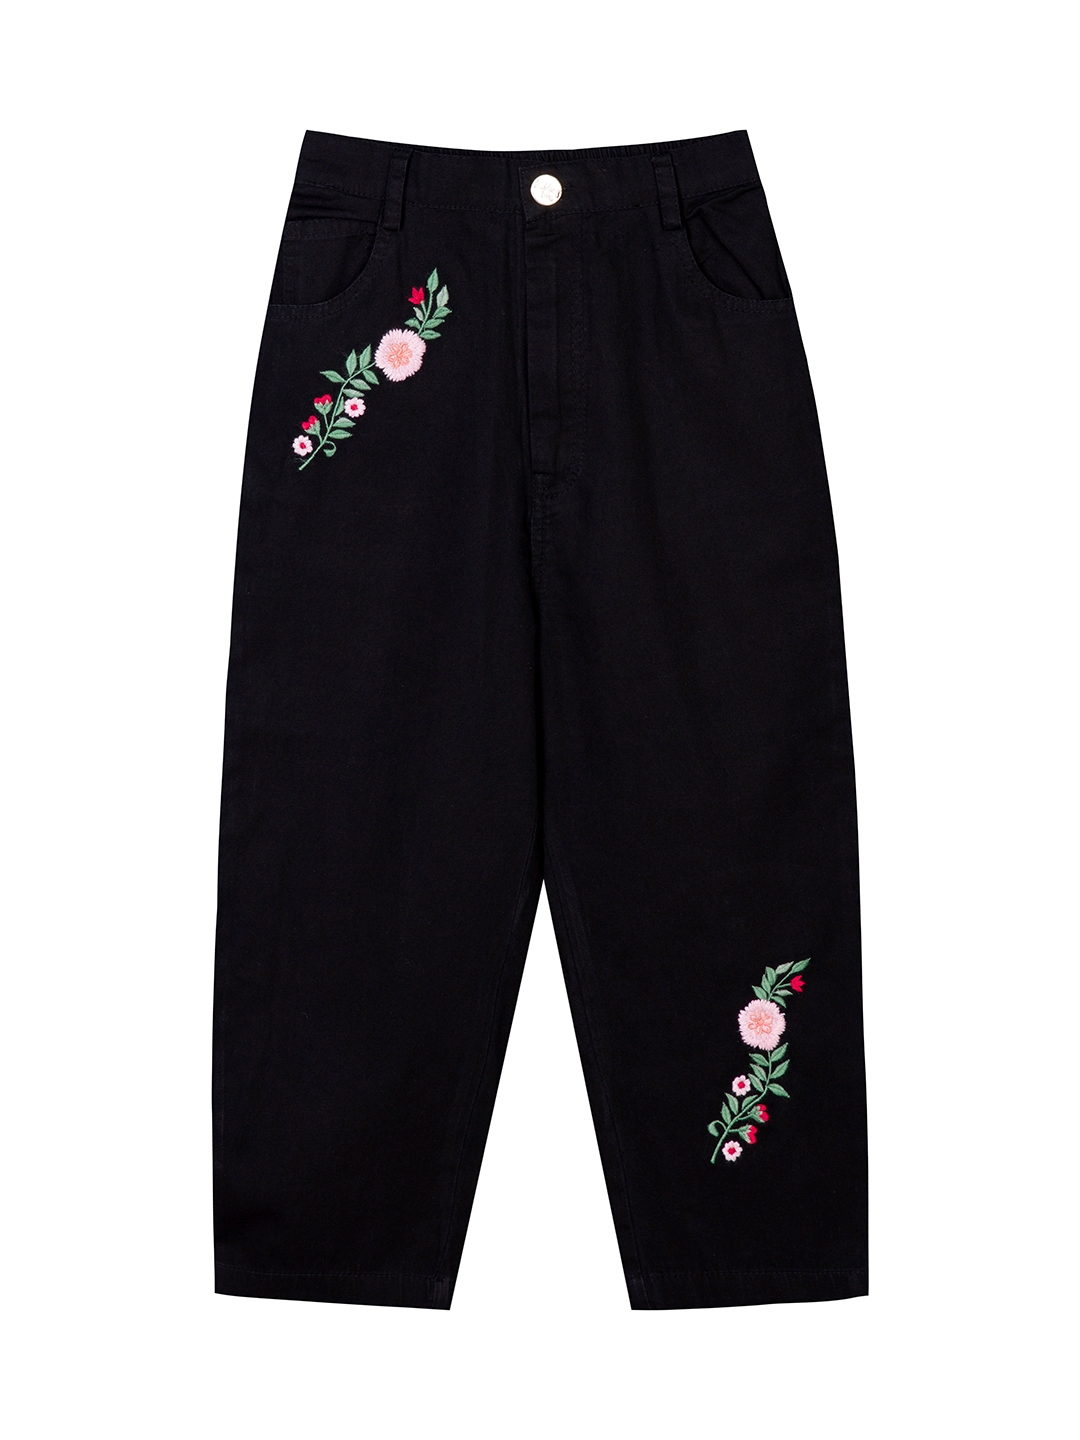 Budding Bees | Budding Bees Girls Denim With Embroidered Jeans-Black 0